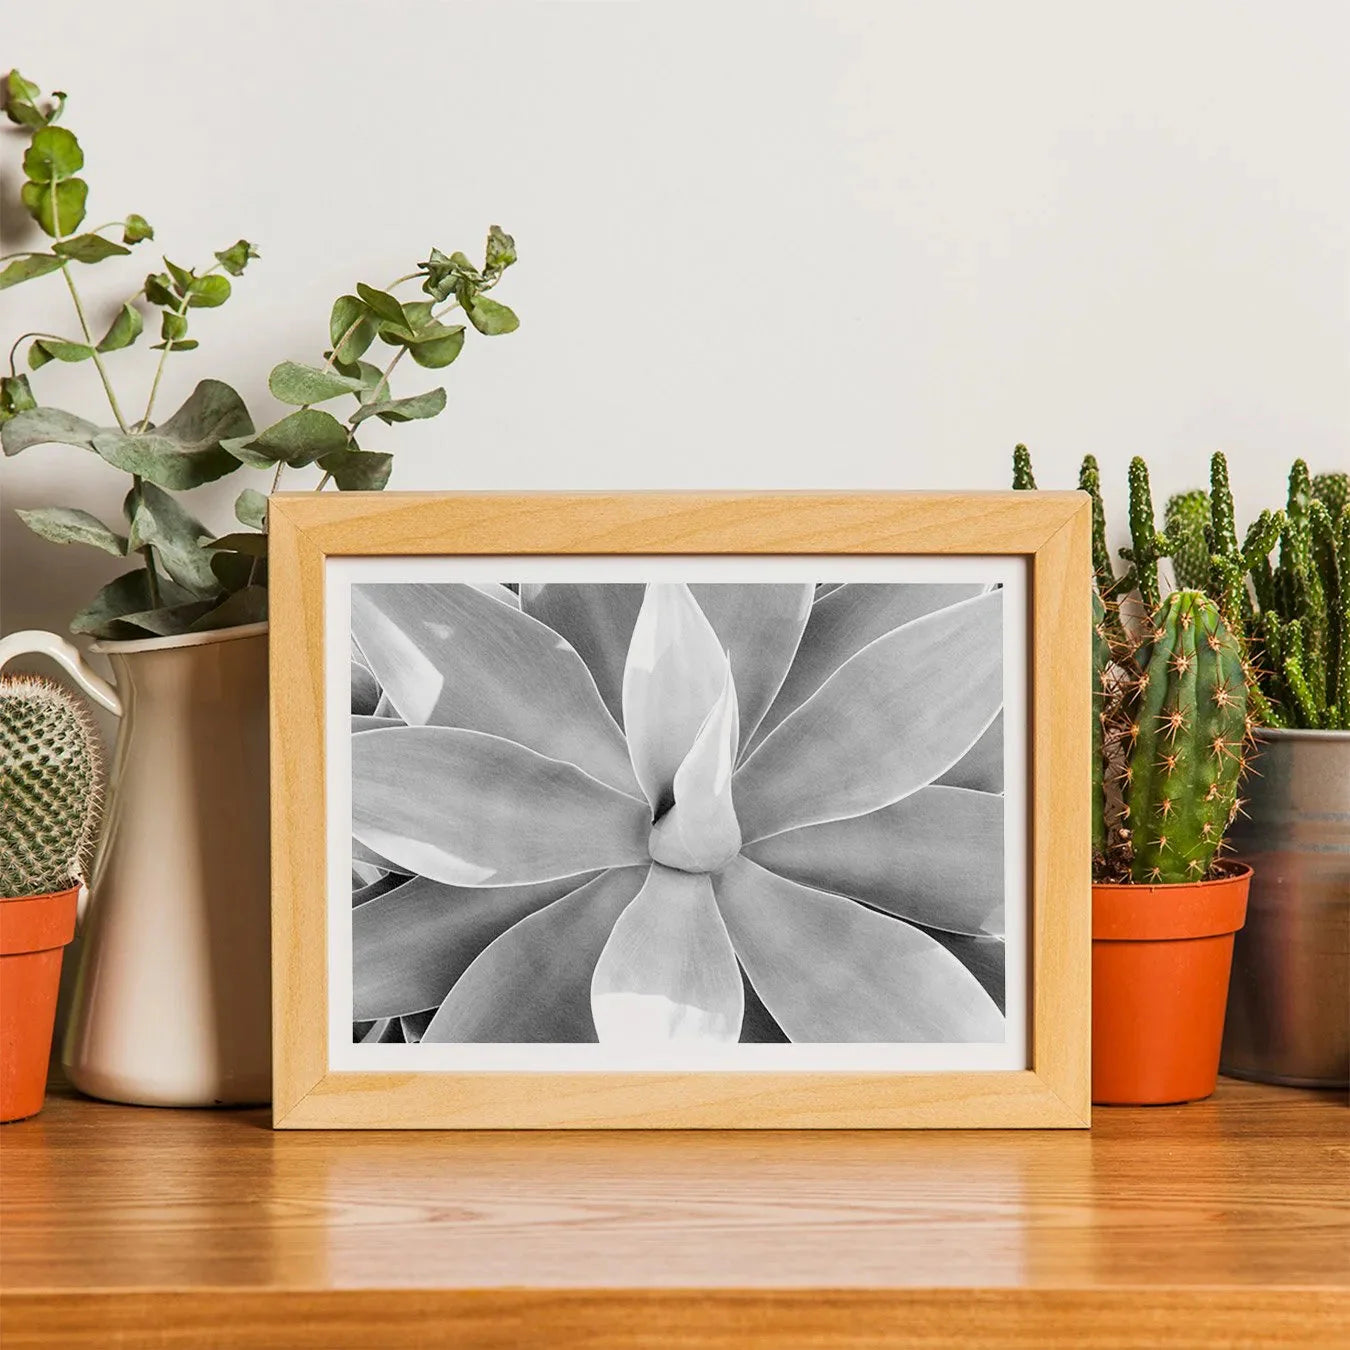 In Bloom Too - Succulent Black And White Wall Art - Posters Prints & Visual Artwork - Aesthetic Art